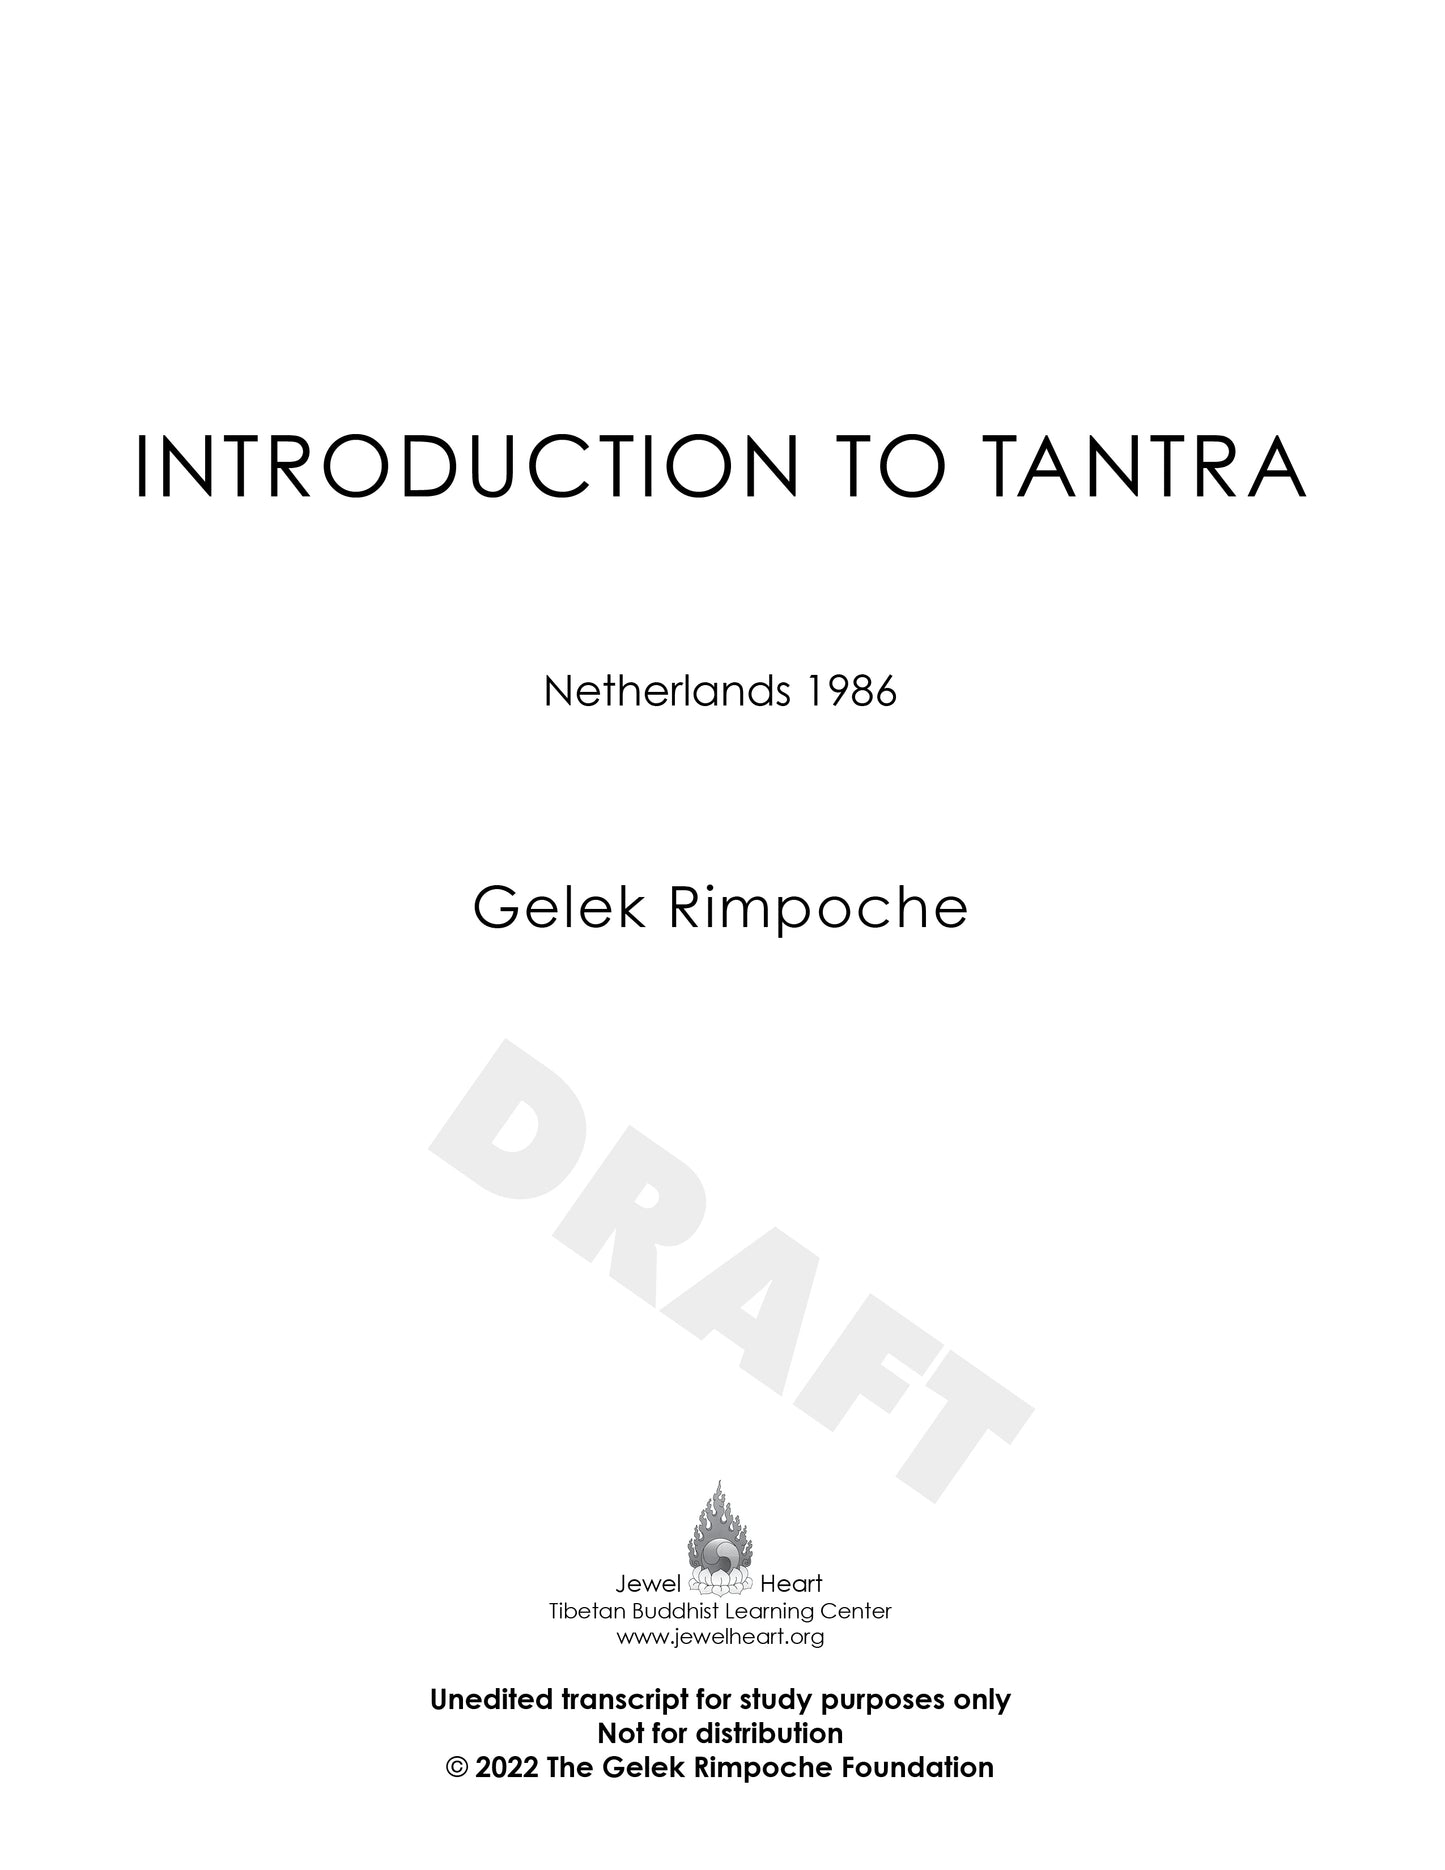 Introduction to Tantra: Netherlands 1986